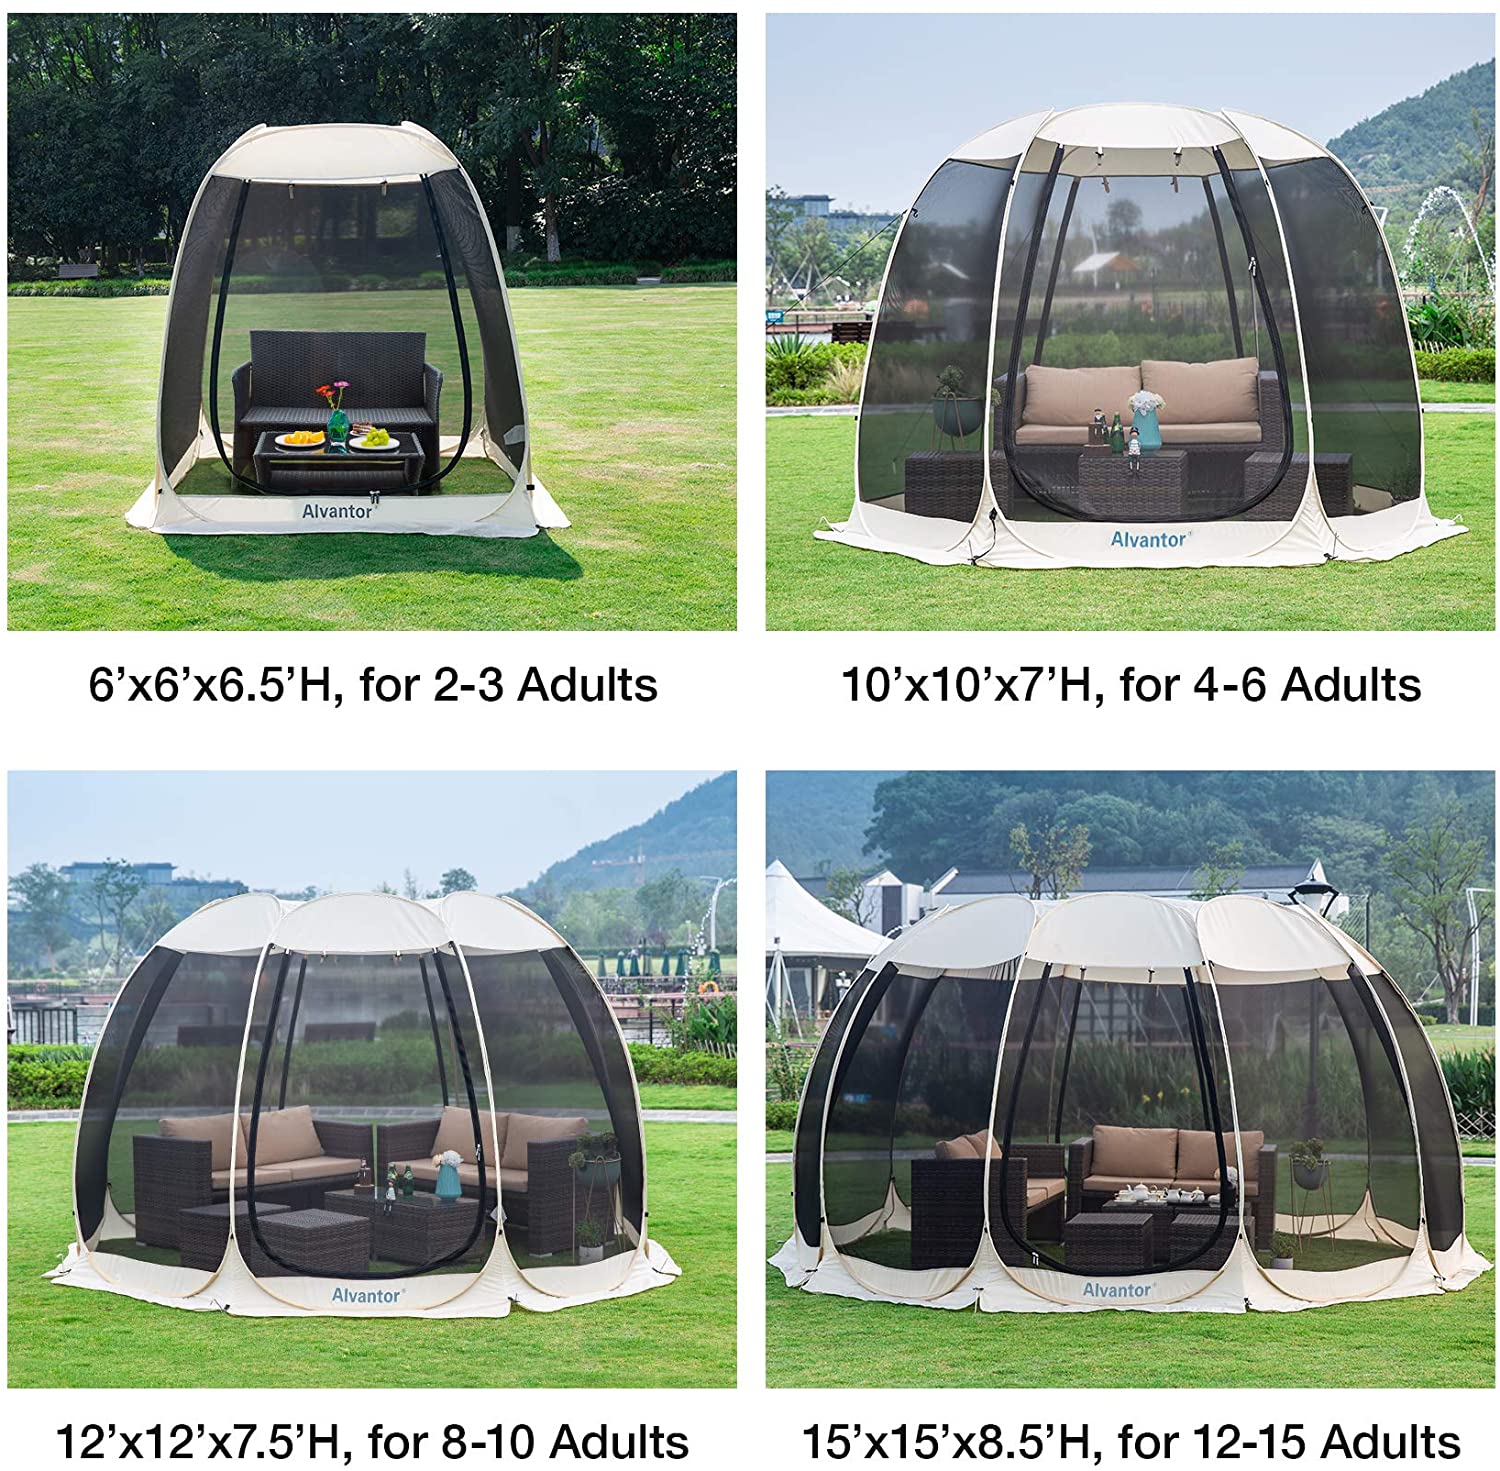 Four different sizes of screened tent canopy yard porches in the garden